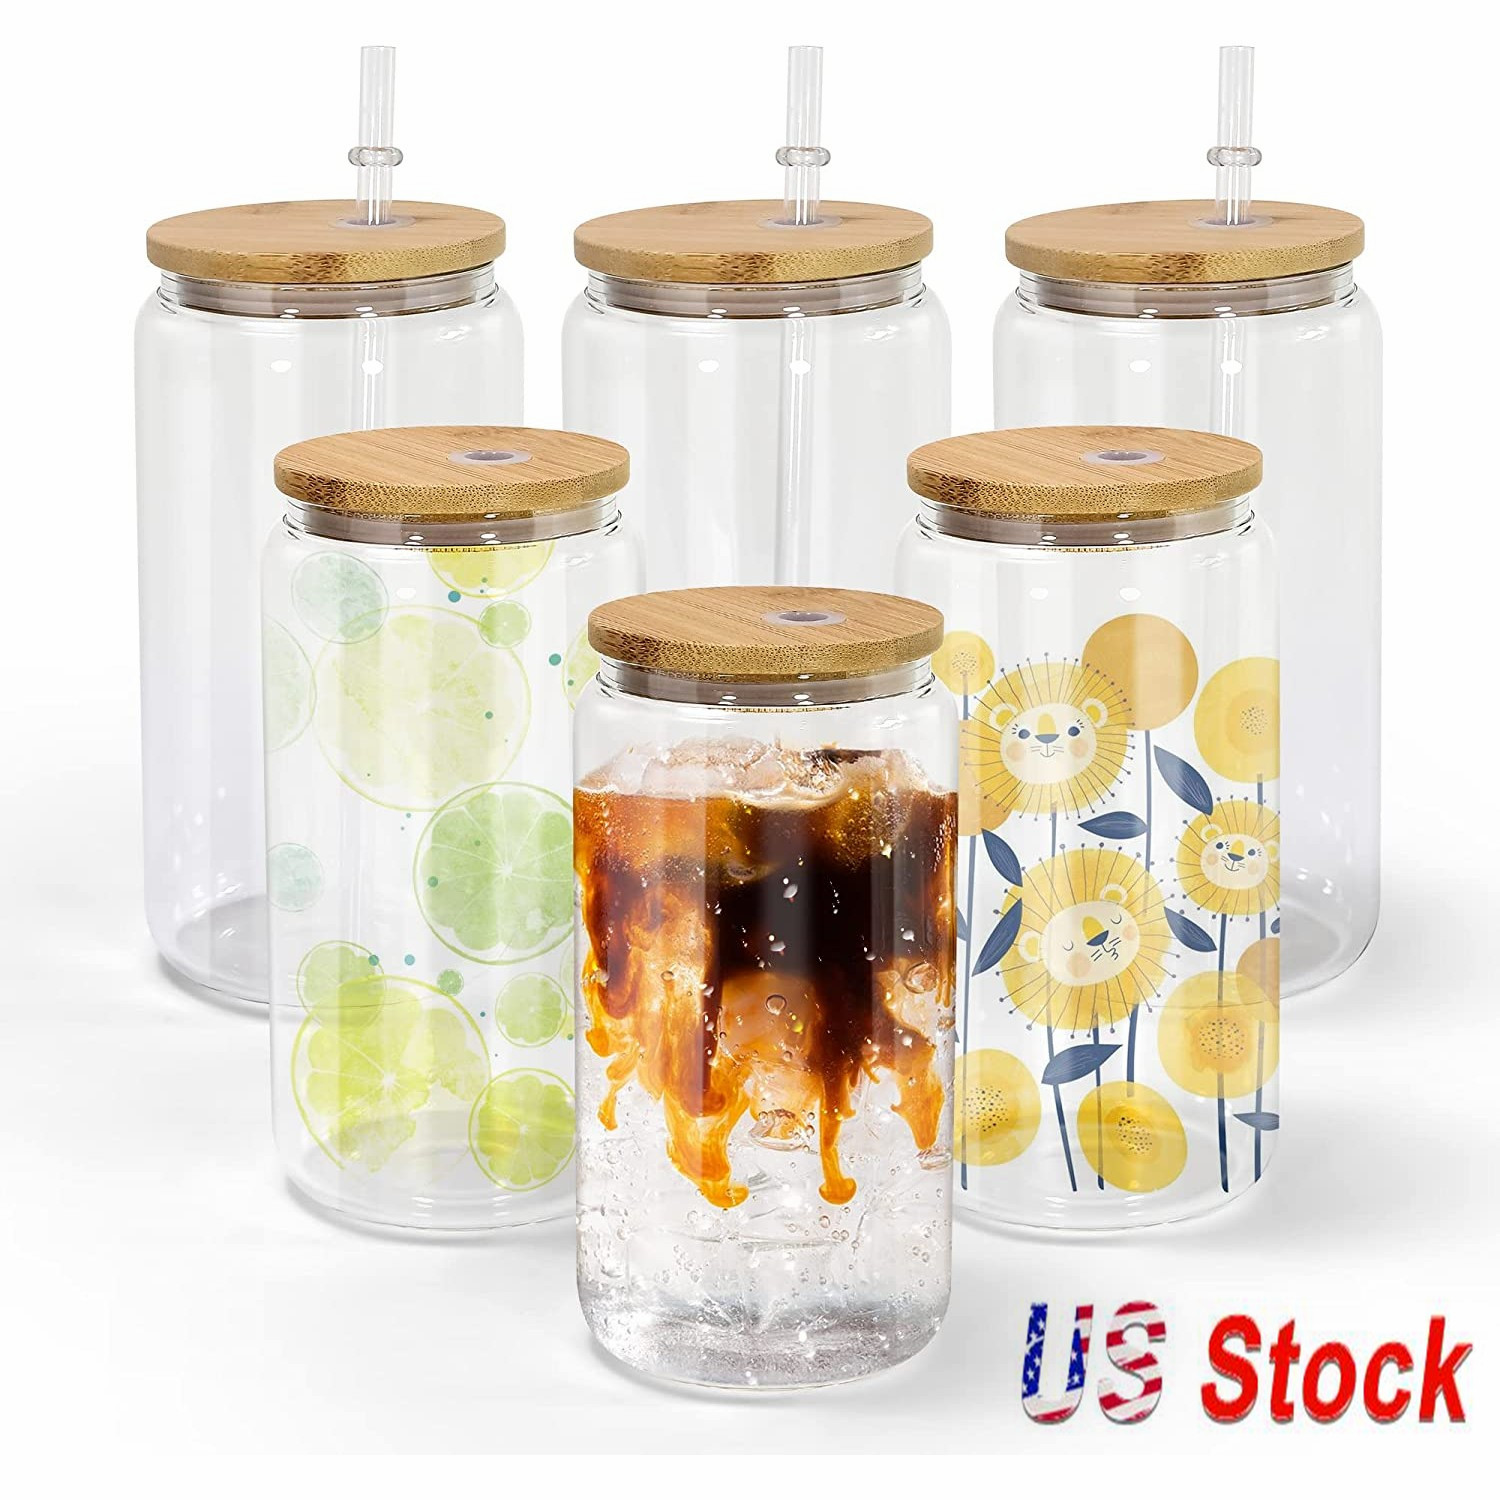 

US STOCK 12oz/16oz Sublimation Blank Tumblers Glass Beer Mugs Can Shaped Cups Soda Drinking Mason Jar Juice Glasses Bottles With Bamboo Lid And Reusable Straw, Clear